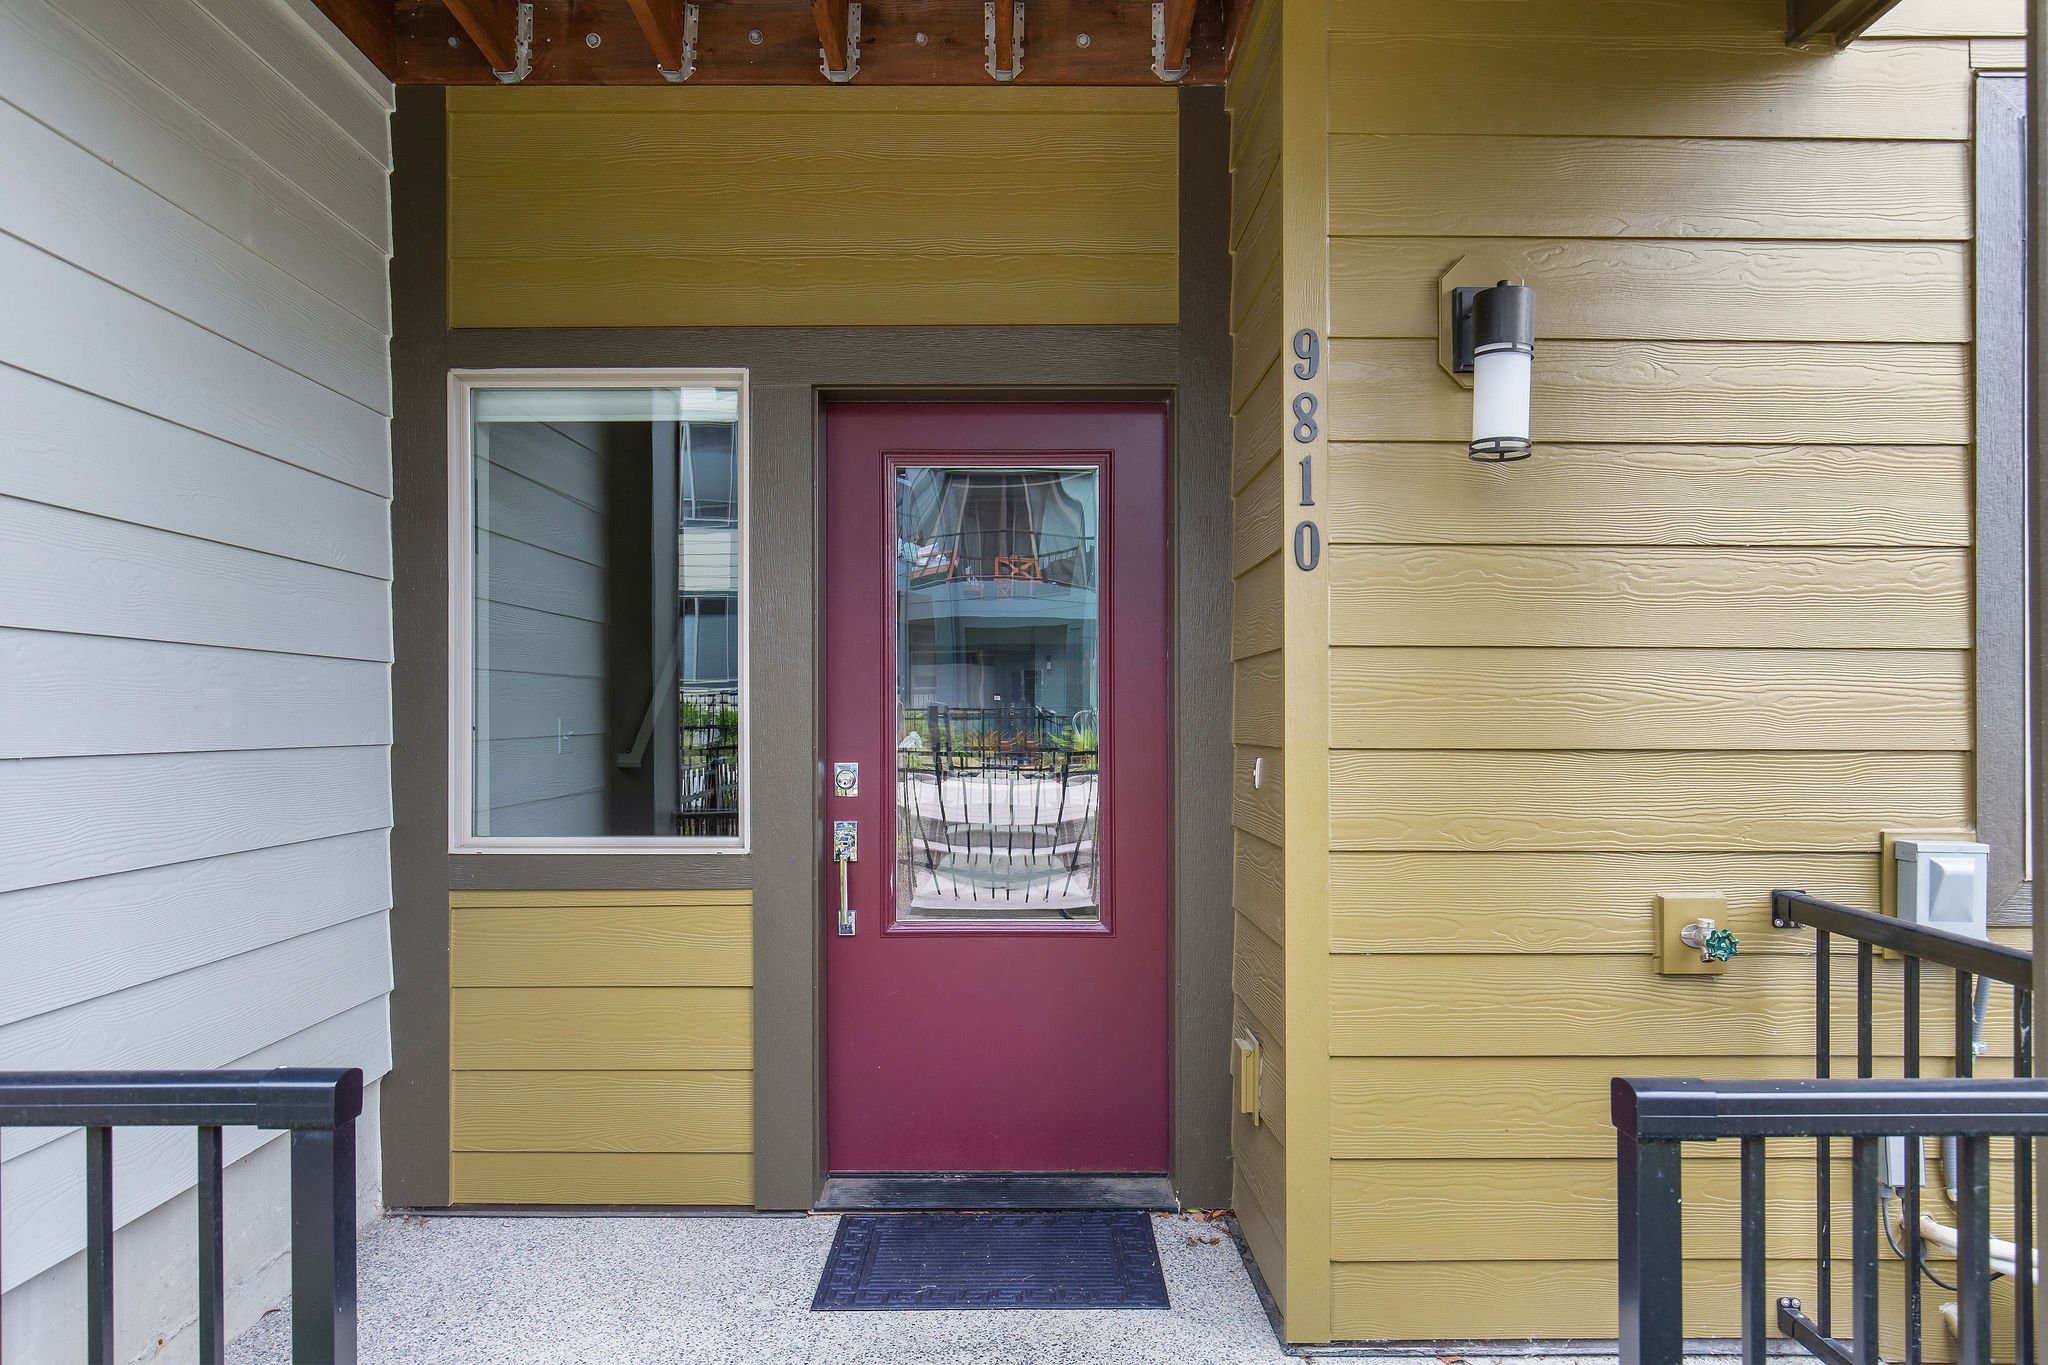  image description: view of red front door to townhome 